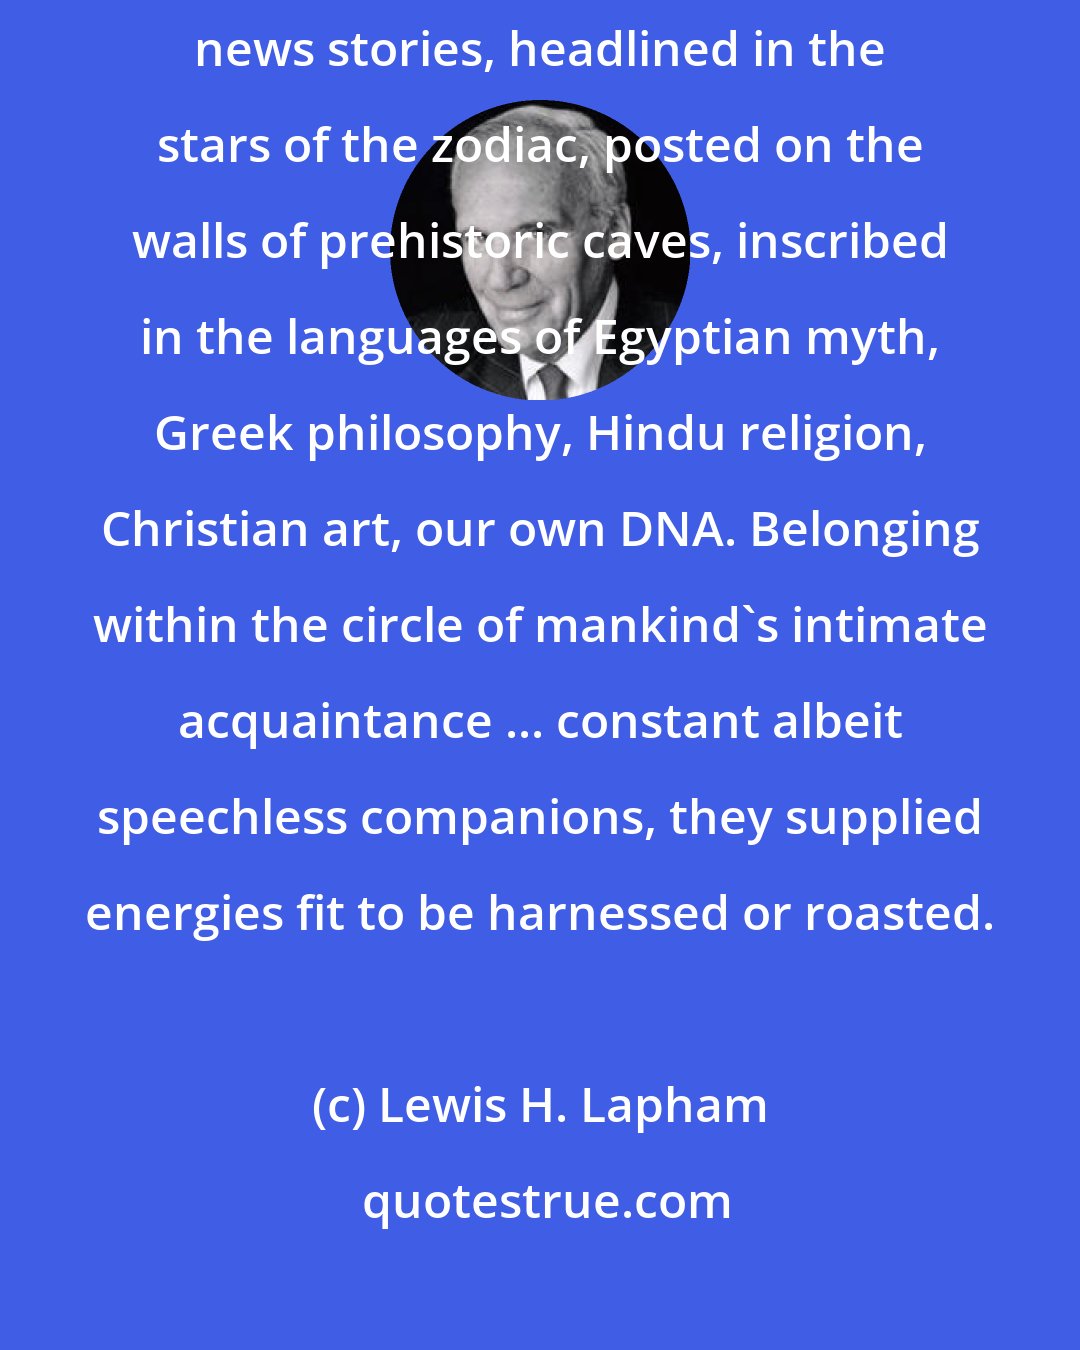 Lewis H. Lapham: Rumors and reports of man's relation with animals are the world's oldest news stories, headlined in the stars of the zodiac, posted on the walls of prehistoric caves, inscribed in the languages of Egyptian myth, Greek philosophy, Hindu religion, Christian art, our own DNA. Belonging within the circle of mankind's intimate acquaintance ... constant albeit speechless companions, they supplied energies fit to be harnessed or roasted.